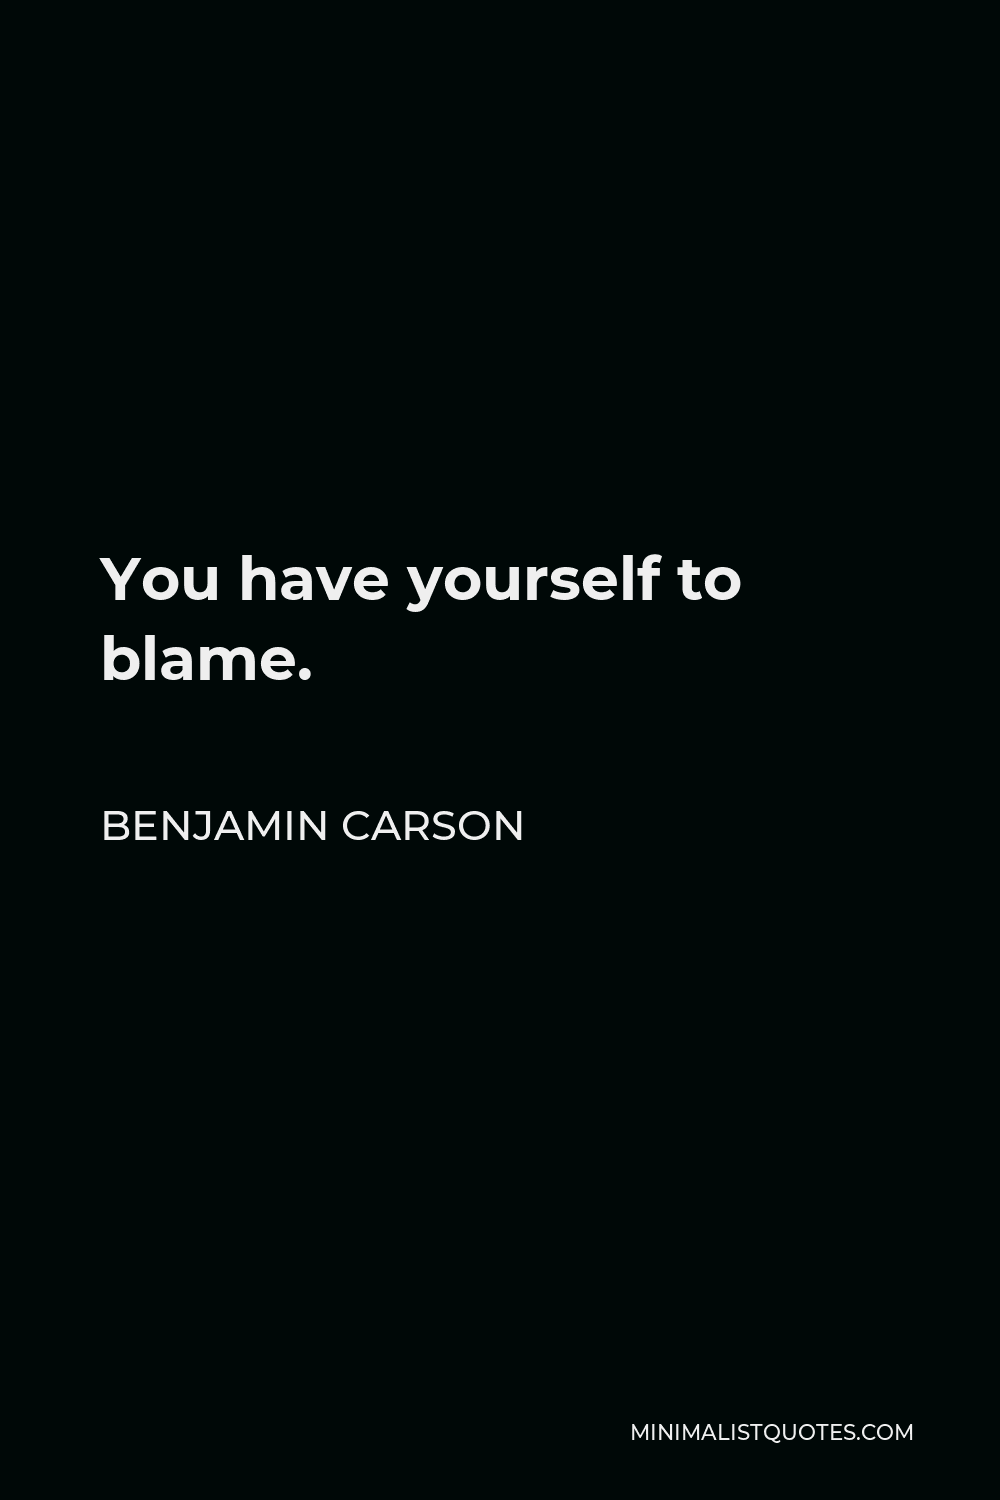 Benjamin Carson Quote - You have yourself to blame.